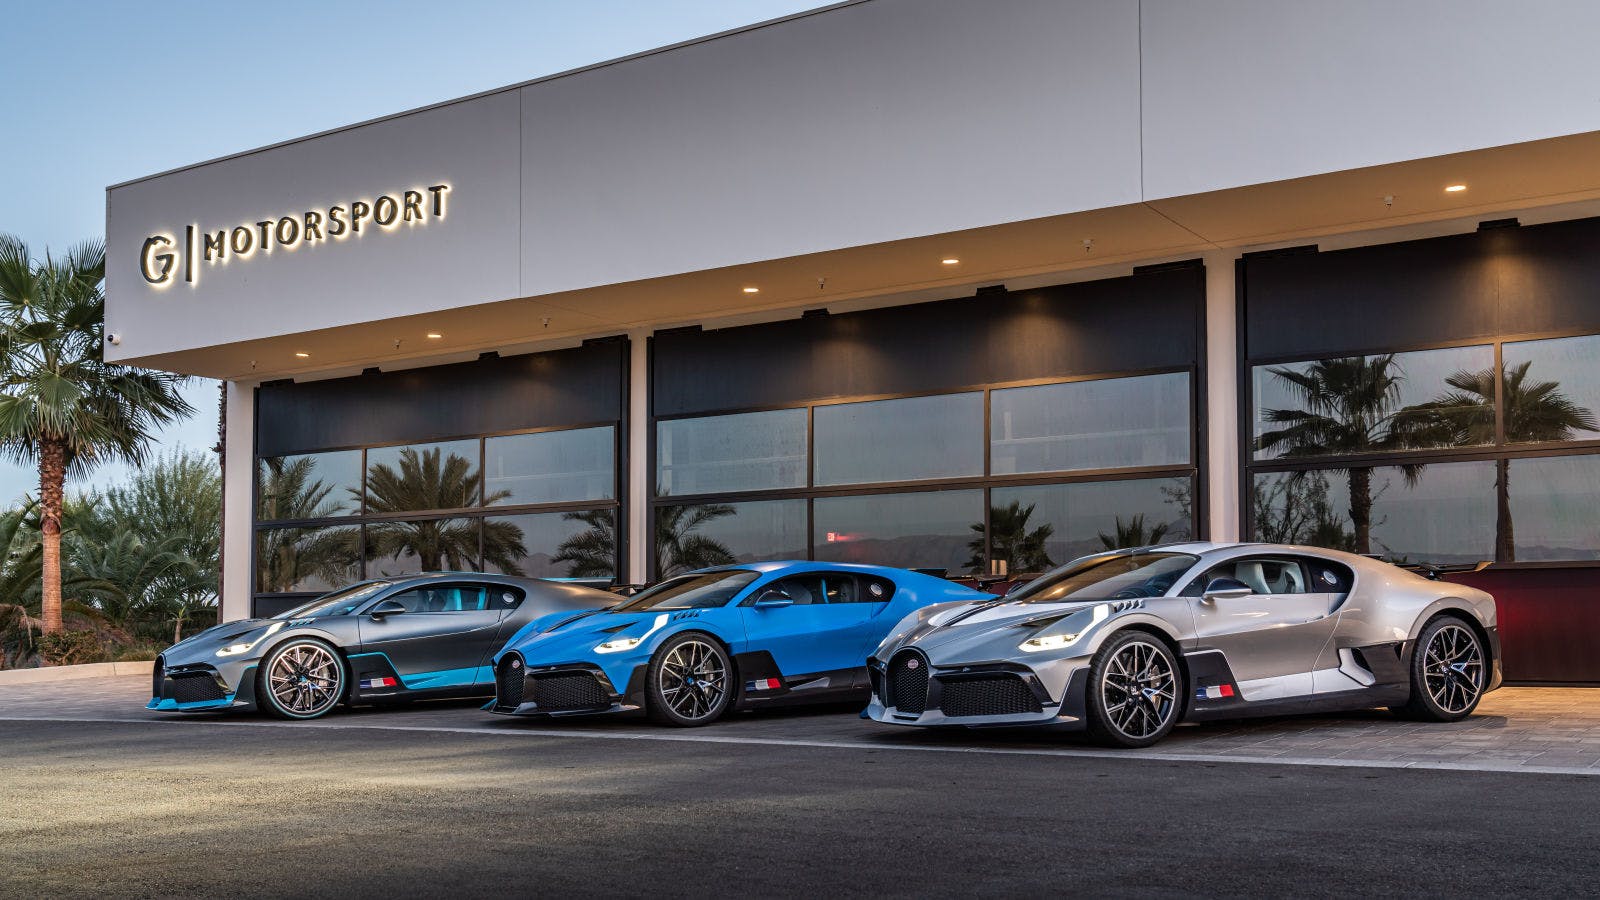 Shortly before their delivery, the three US Divo customer vehicles meet at the racetrack “The Thermal Club” in Palm Desert, California.